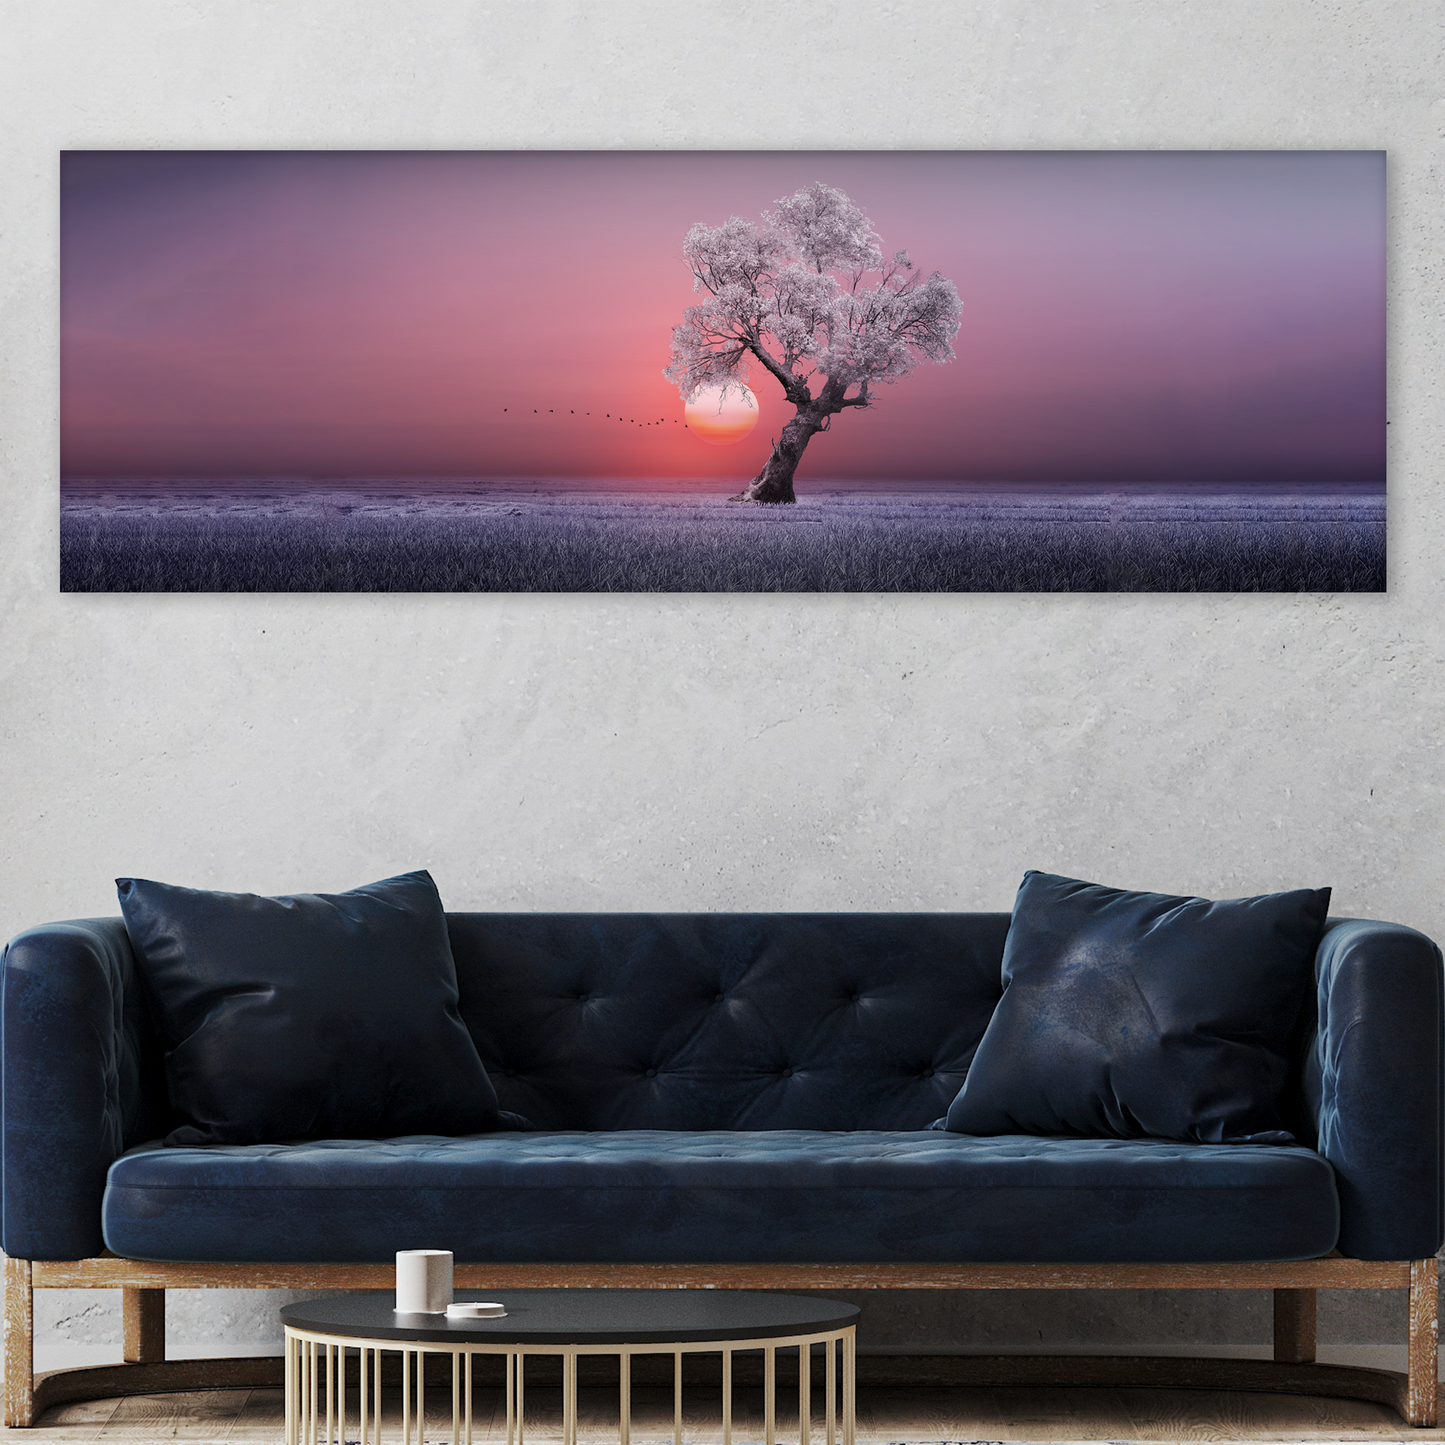 Alone Tree VI - Image by Tailored Canvases